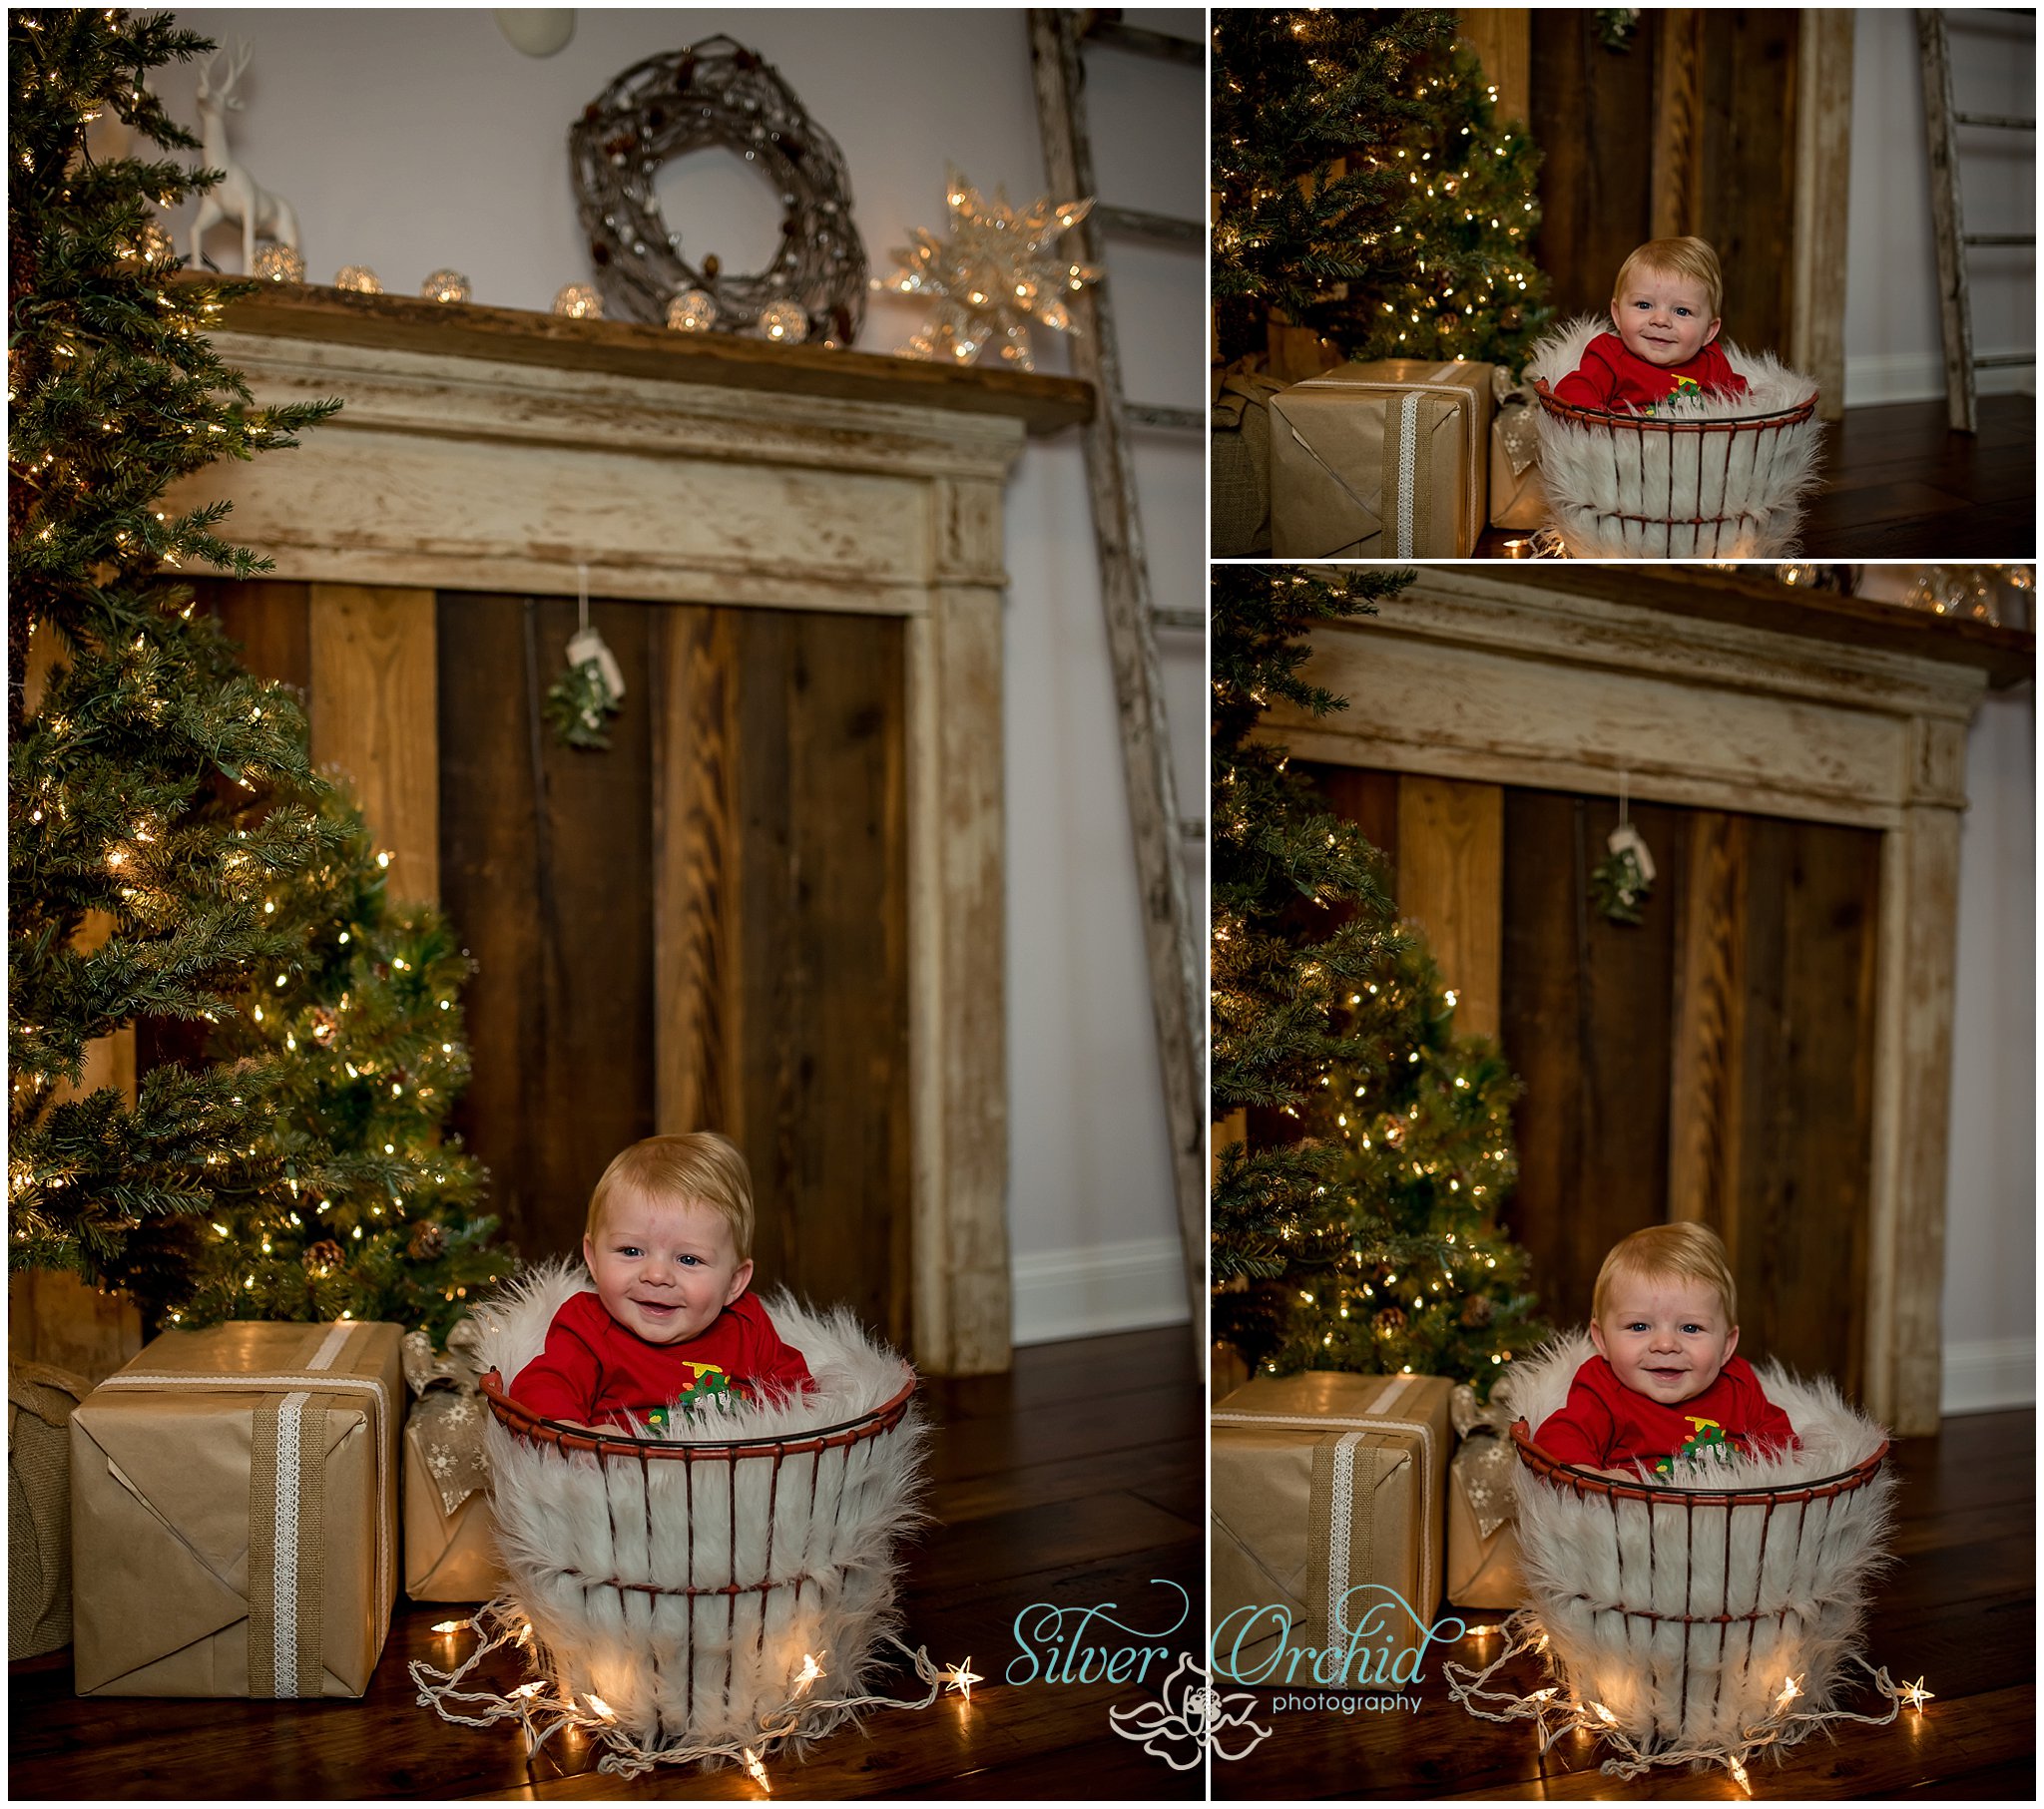 ©Silver Orchid Photography_holiday_silverorchidphotography.com_0026.jpg